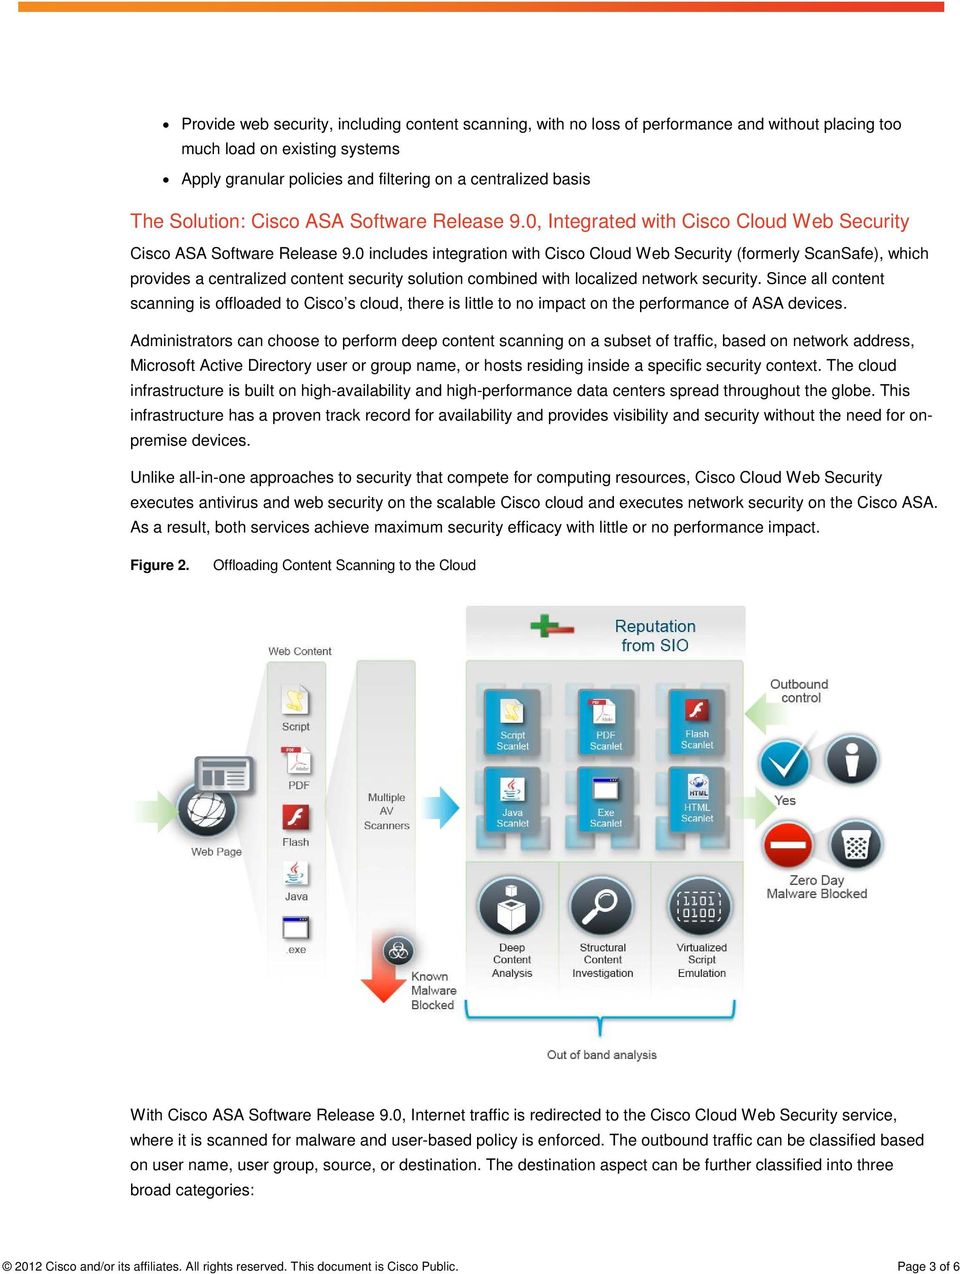 0 includes integration with Cisco Cloud Web Security (formerly ScanSafe), which provides a centralized content security solution combined with localized network security.